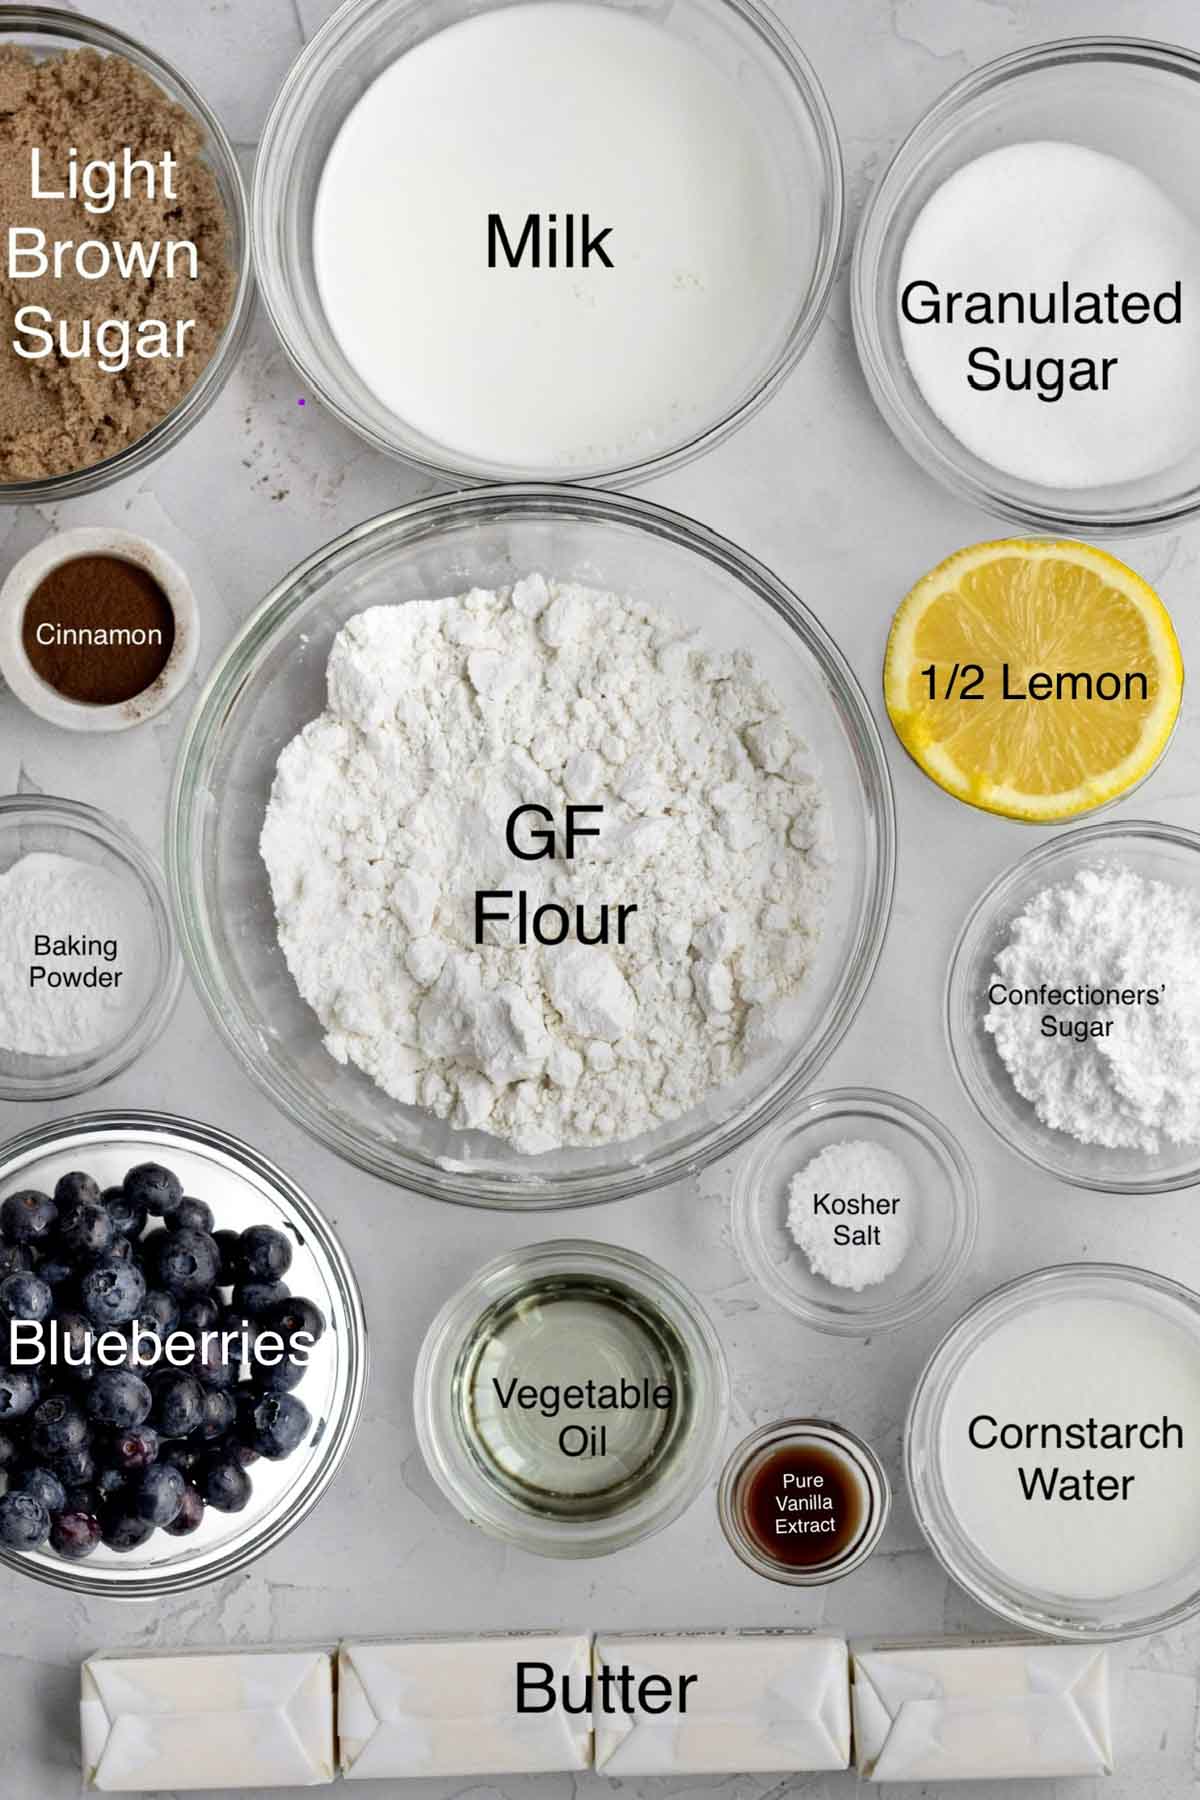 Light brown sugar, milk, granulated sugar, cinnamon, half a lemon, baking powder, gluten free flour, confectioners' sugar, blueberries, vegetable oil, kosher salt, pure vanilla extract, cornstarch water and butter in separate containers.